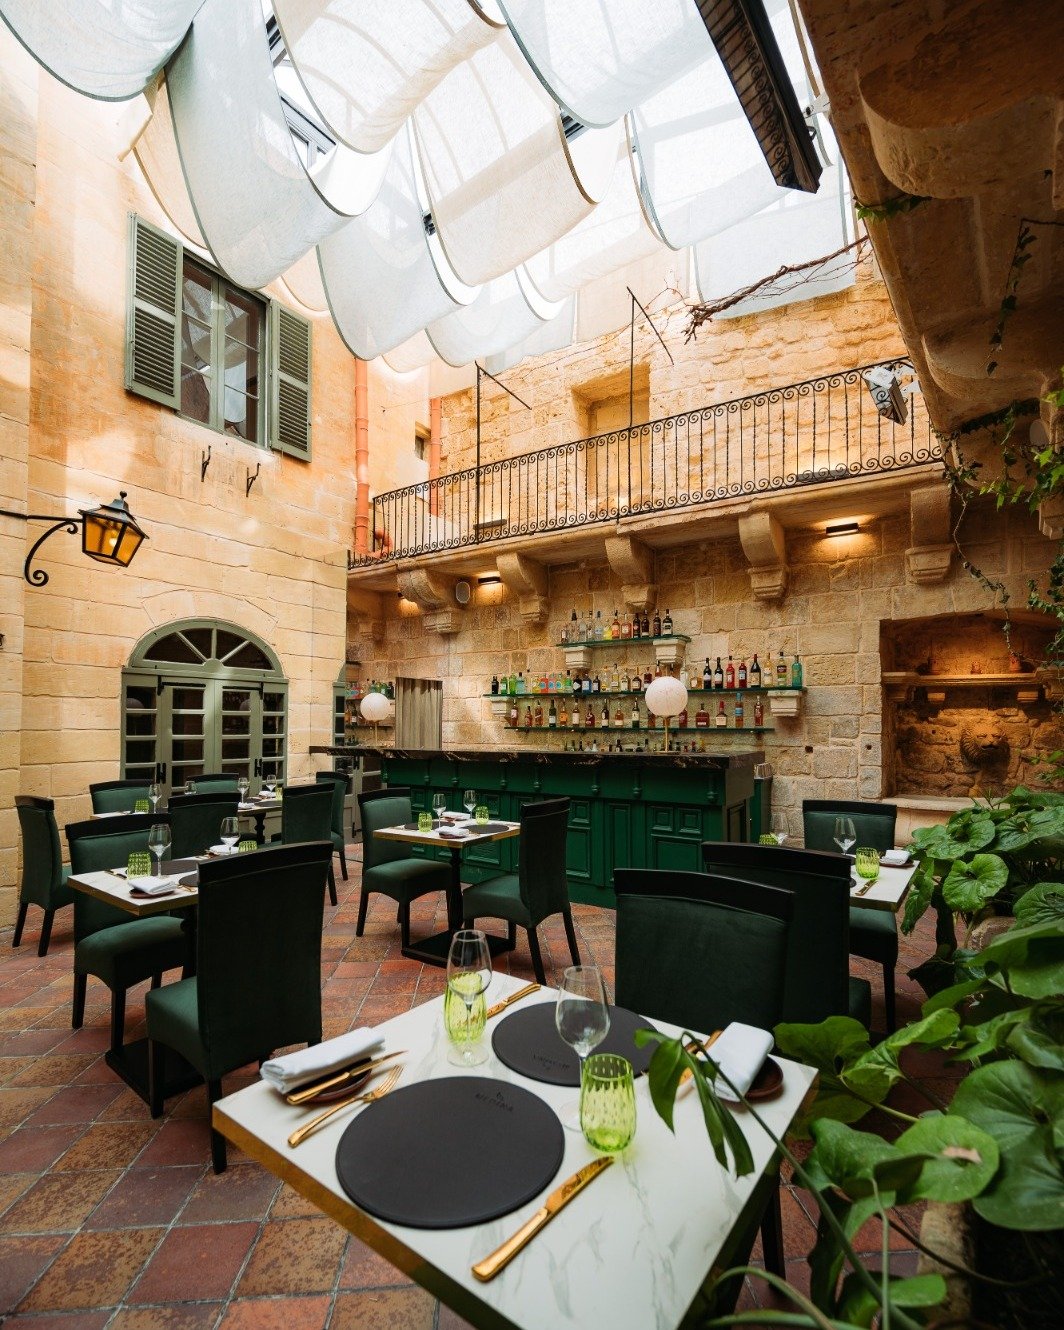 The walls within the Medina restaurant echo notes of tranquillity and tales of gastronomic perfection